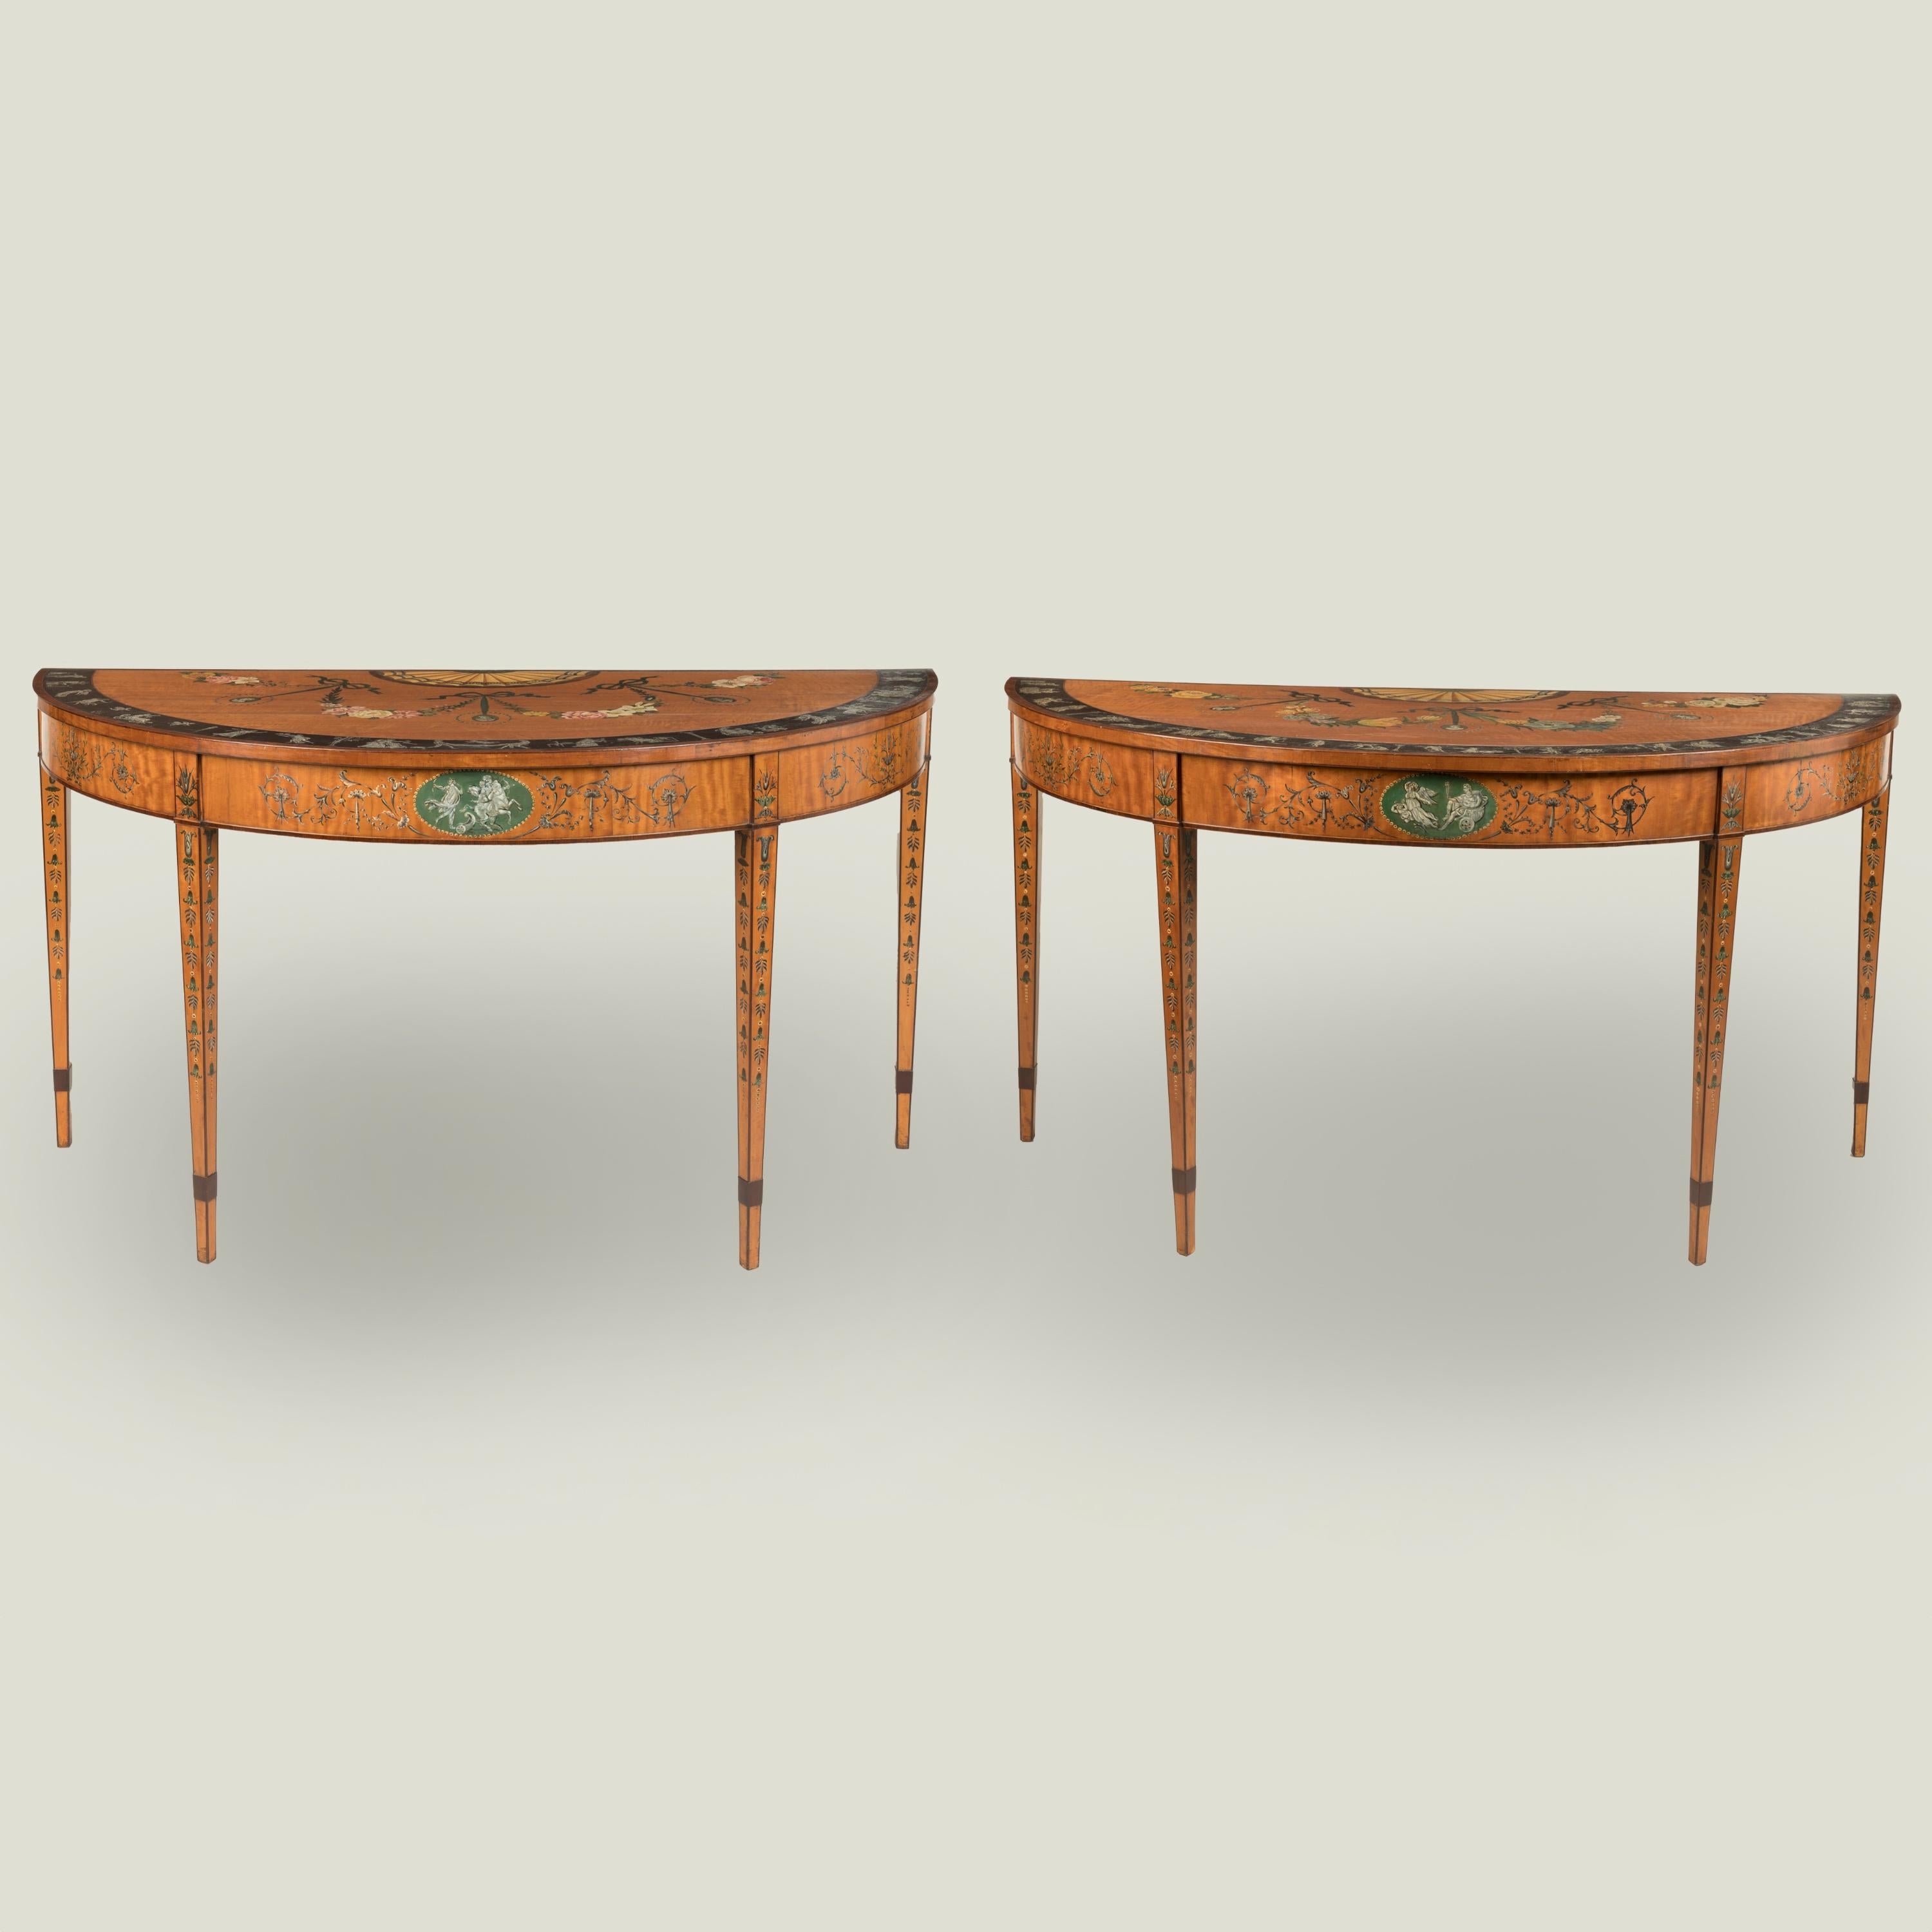 A Fine Pair of Neoclassical Painted Satinwood Console Tables

Of demilune outline, veneered with satinwood and decorated with polychrome paintwork; each table supported on four square tapering legs adorned with painted bellflowers and anthemia; the